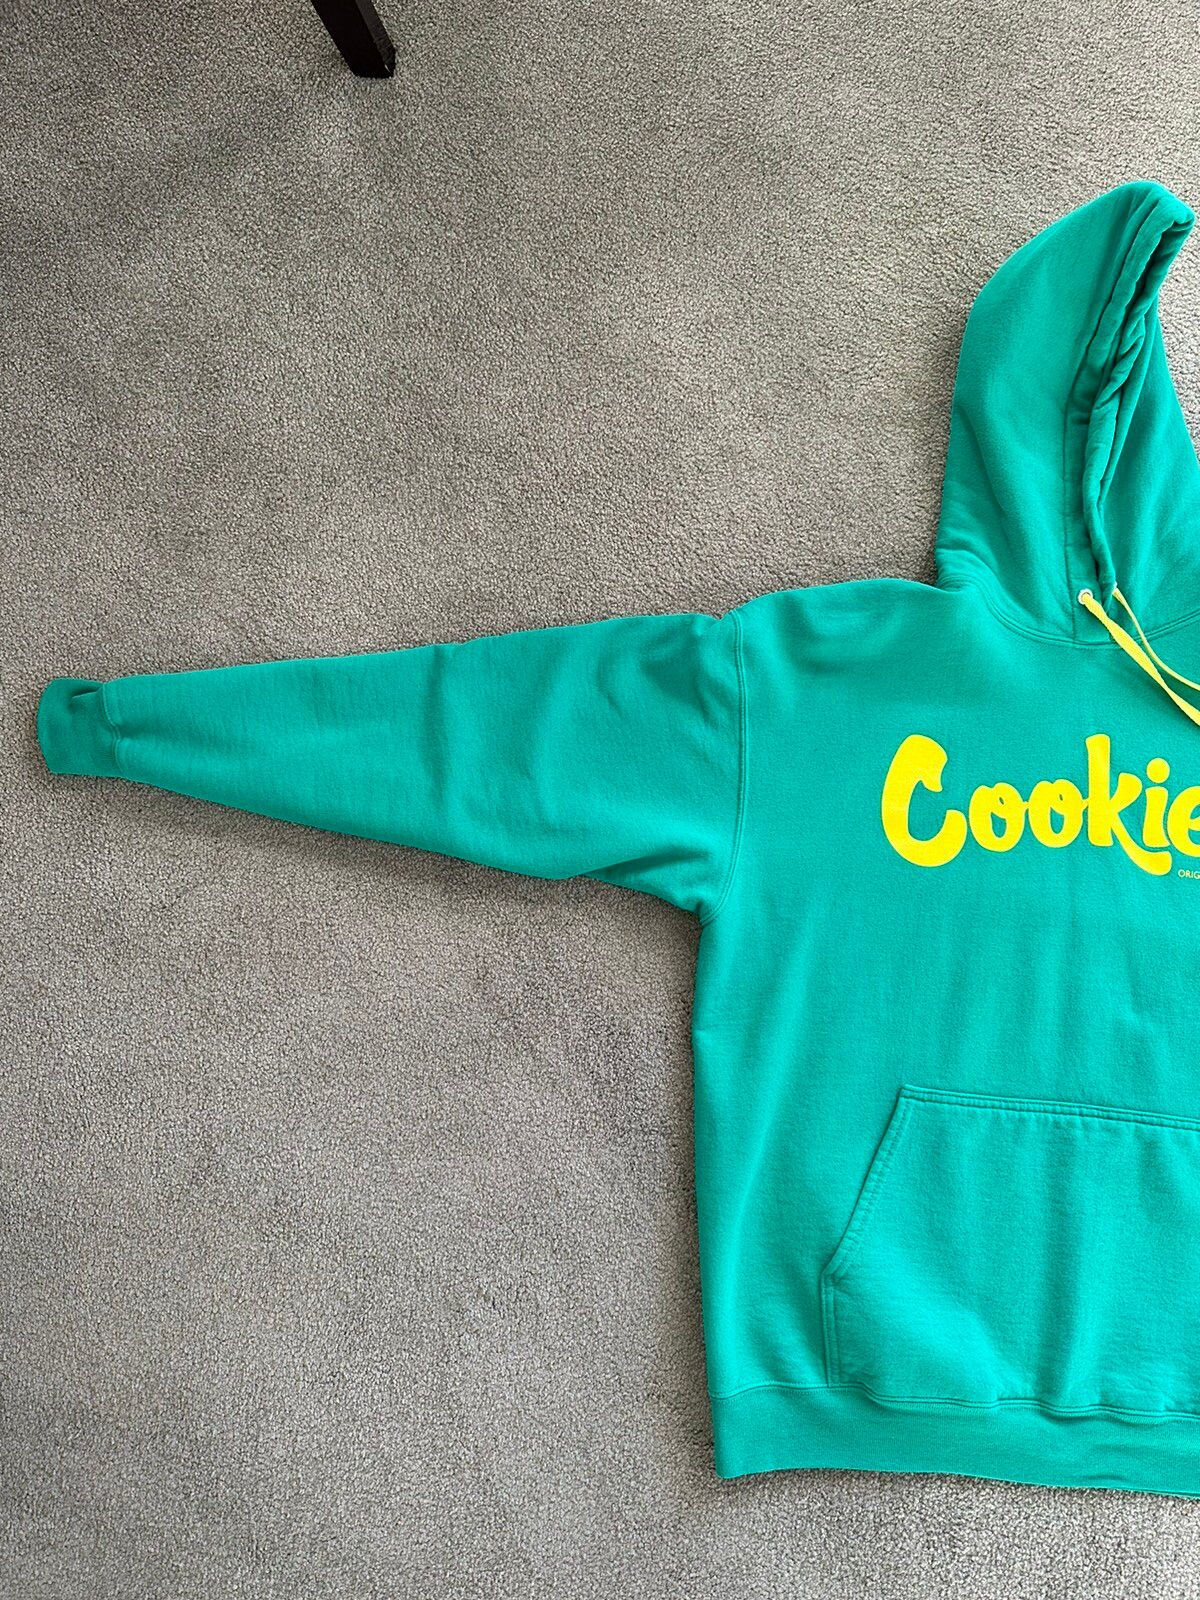 Cookies Cookies Hoodie Green/Yellow (Rare Color) Size US XL / EU 56 / 4 - 2 Preview